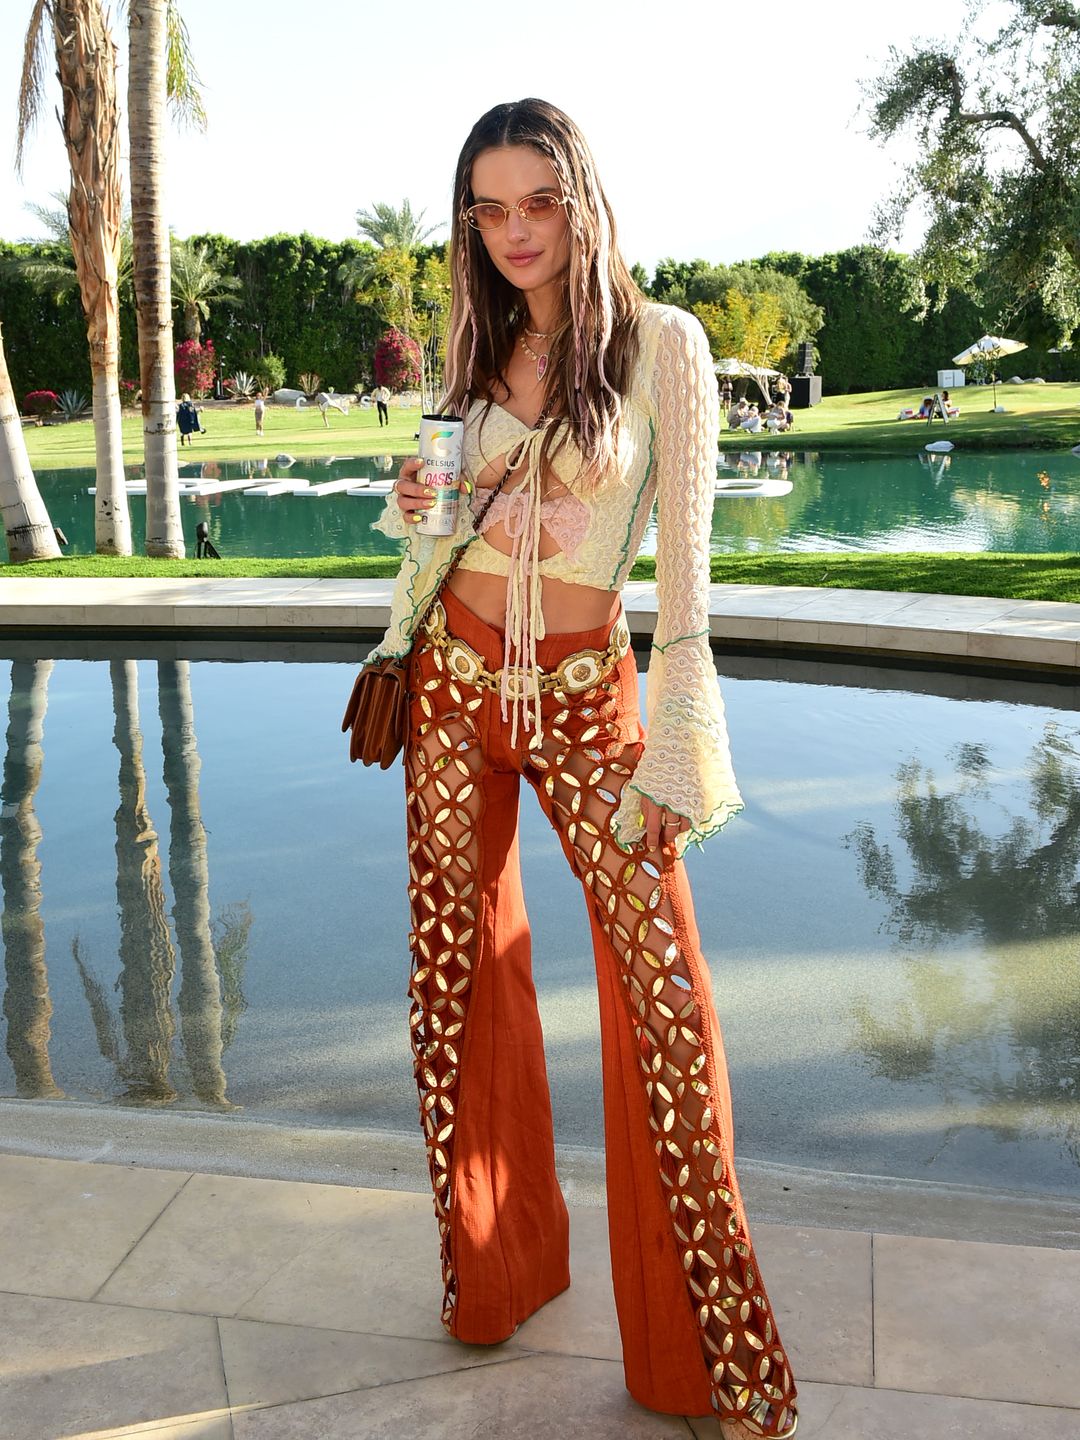 COACHELLA, CALIFORNIA - APRIL 14: Alessandra Ambrosio attends the CELSIUS Oasis Vibe House on April 14, 2023 in Coachella, California. (Photo by Vivien Killilea/Getty Images for CELSIUS)